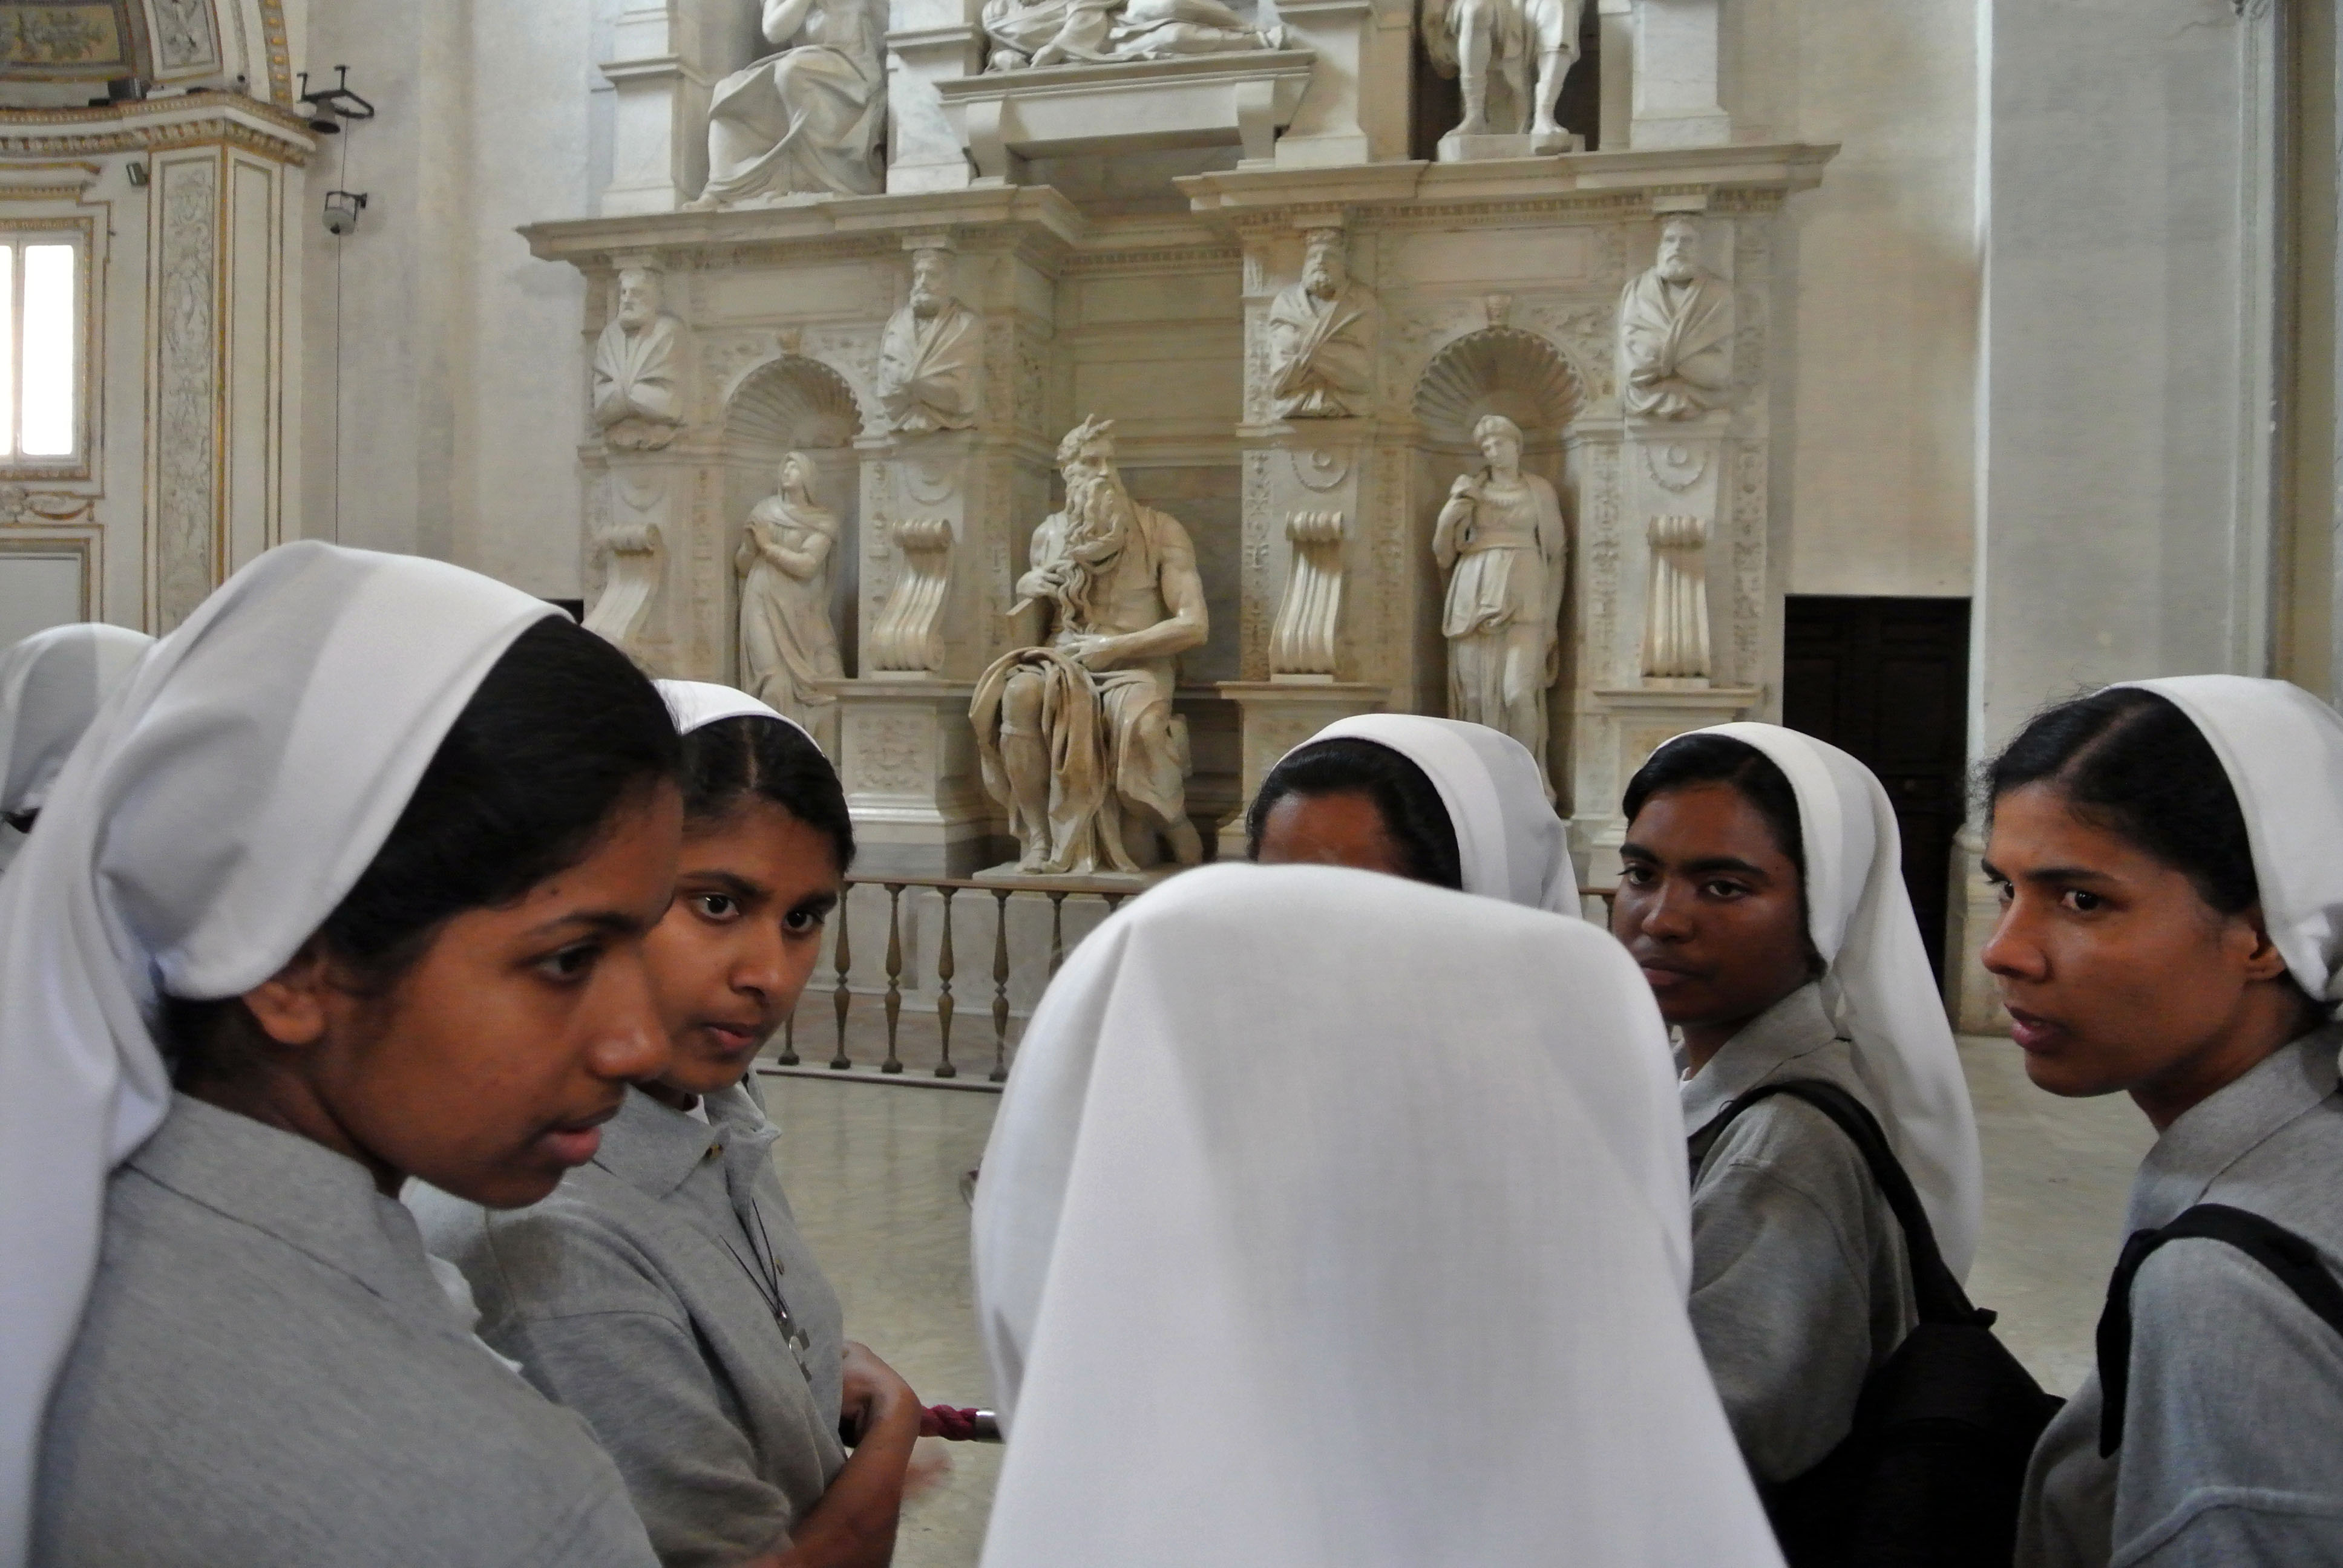 Nuns admire Michelangelo's Moses masterpiece inside St. Peter's in chains Basilica, in Rome, Tuesday, July 2, 2013. The Moses is part of Pope Julius II's tomb, a project Michelangelo worked on intermittently for 40 years, between 1505 and 1545. (AP Photo/Gregorio Borgia)